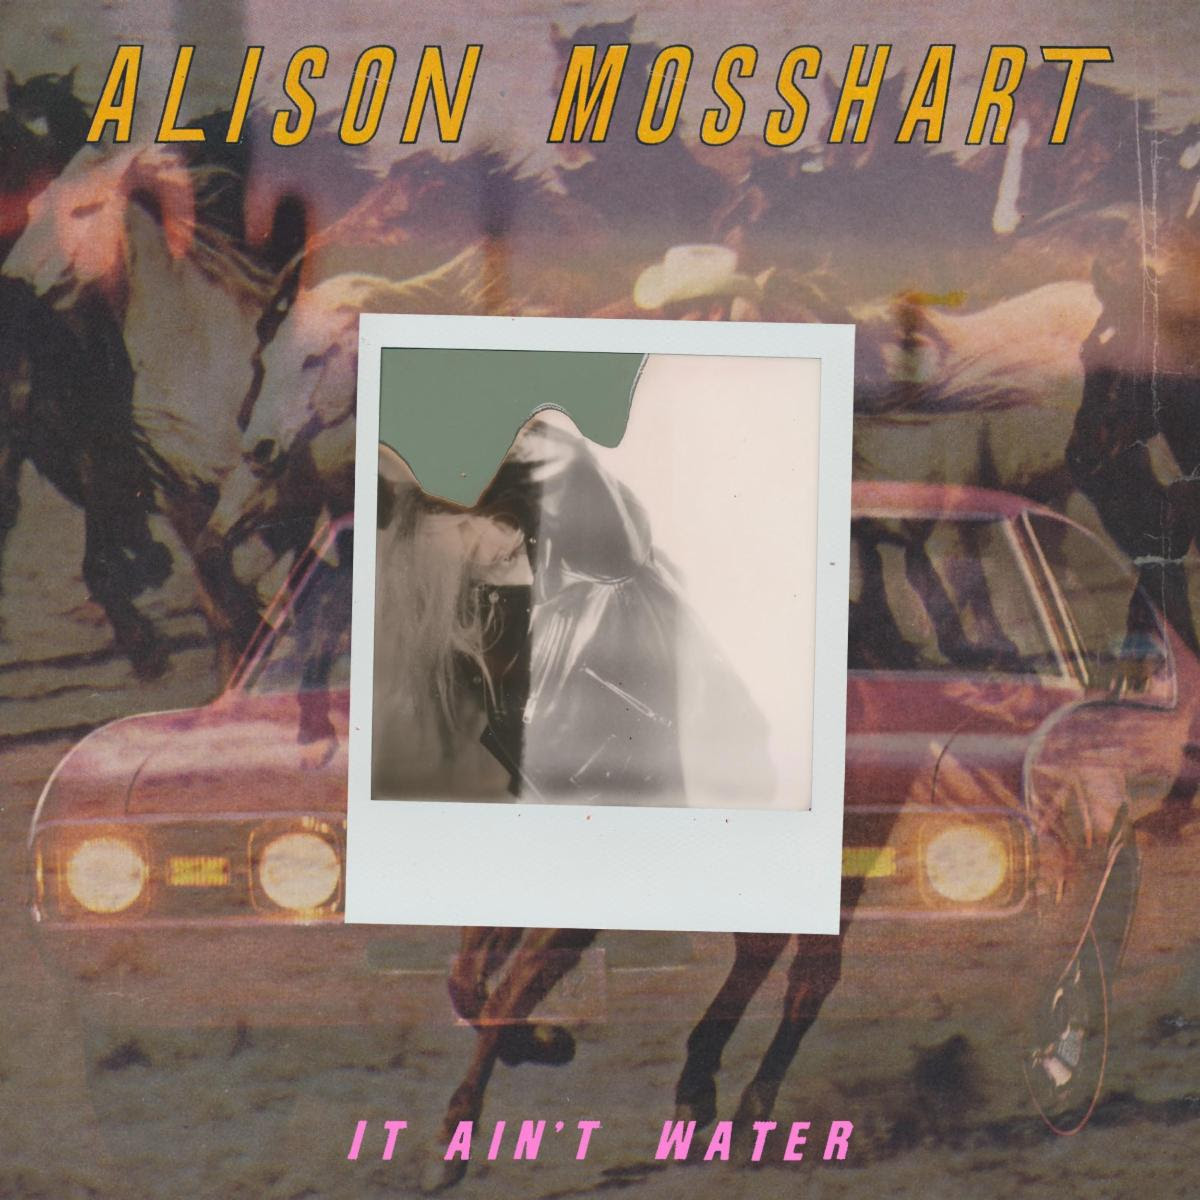 Alison Mosshart (The Kills, The Dead Weather), has shared “It Ain’t Water,” off her forthcoming 7-inch release on Domino Records. The vinyl release pairs